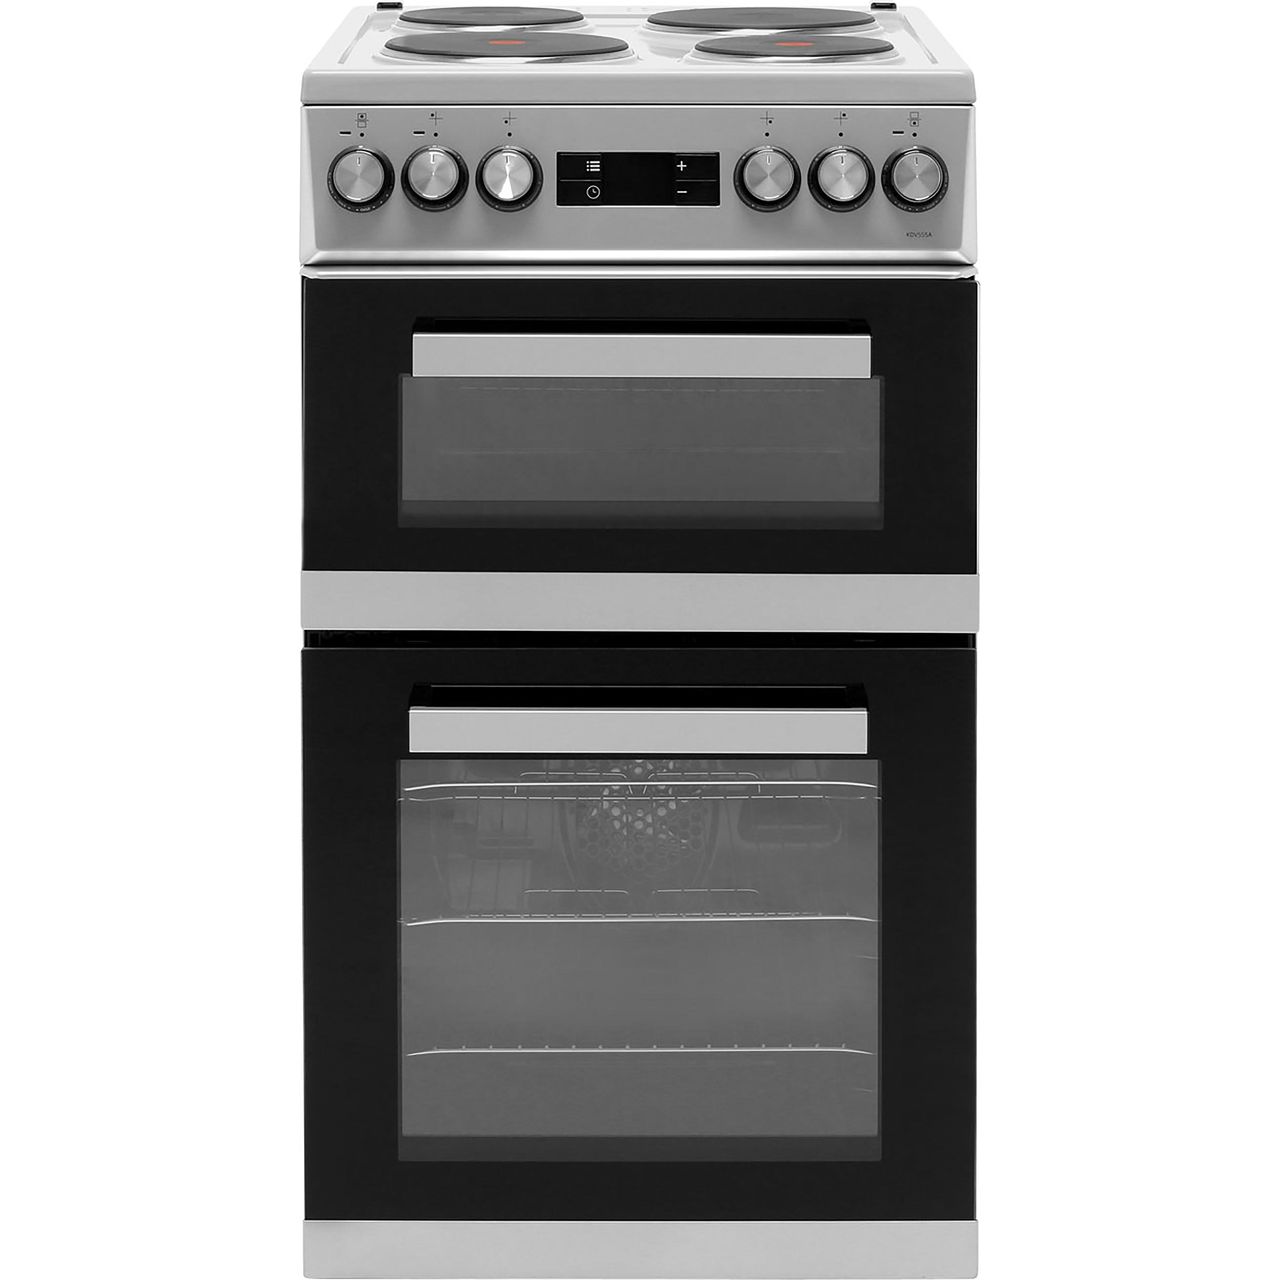 Beko KDV555AS 50cm Electric Cooker with Solid Plate Hob Review